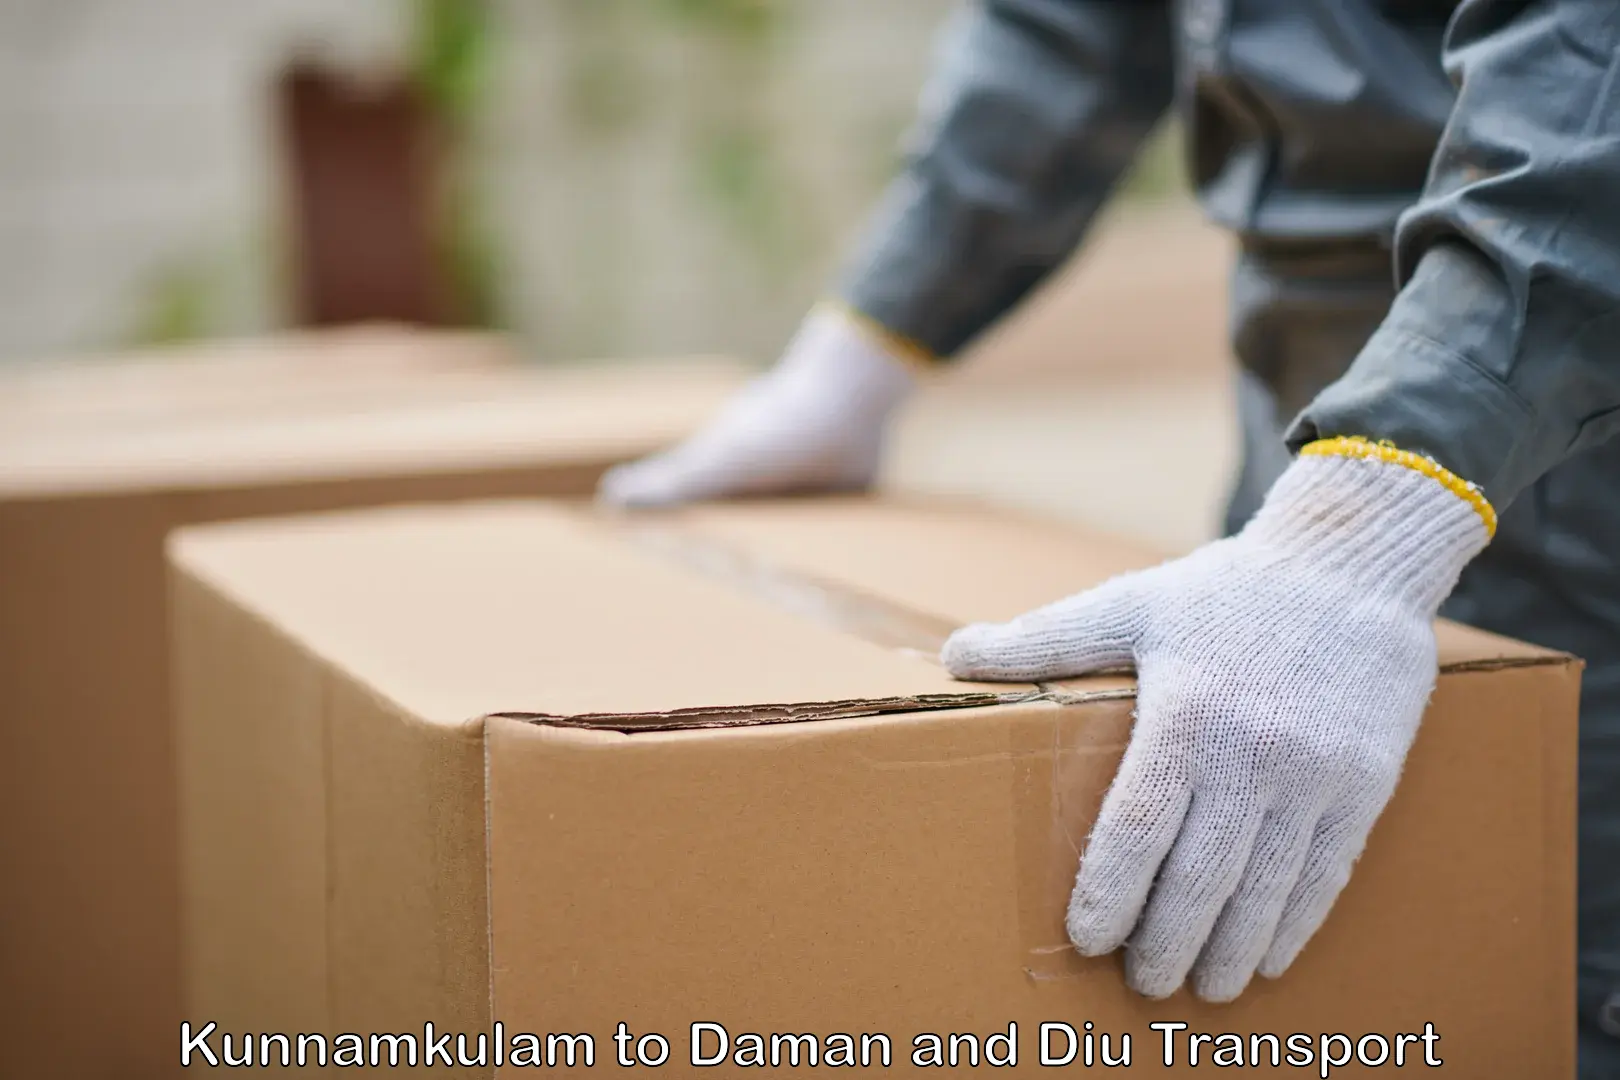 Vehicle transport services in Kunnamkulam to Daman and Diu